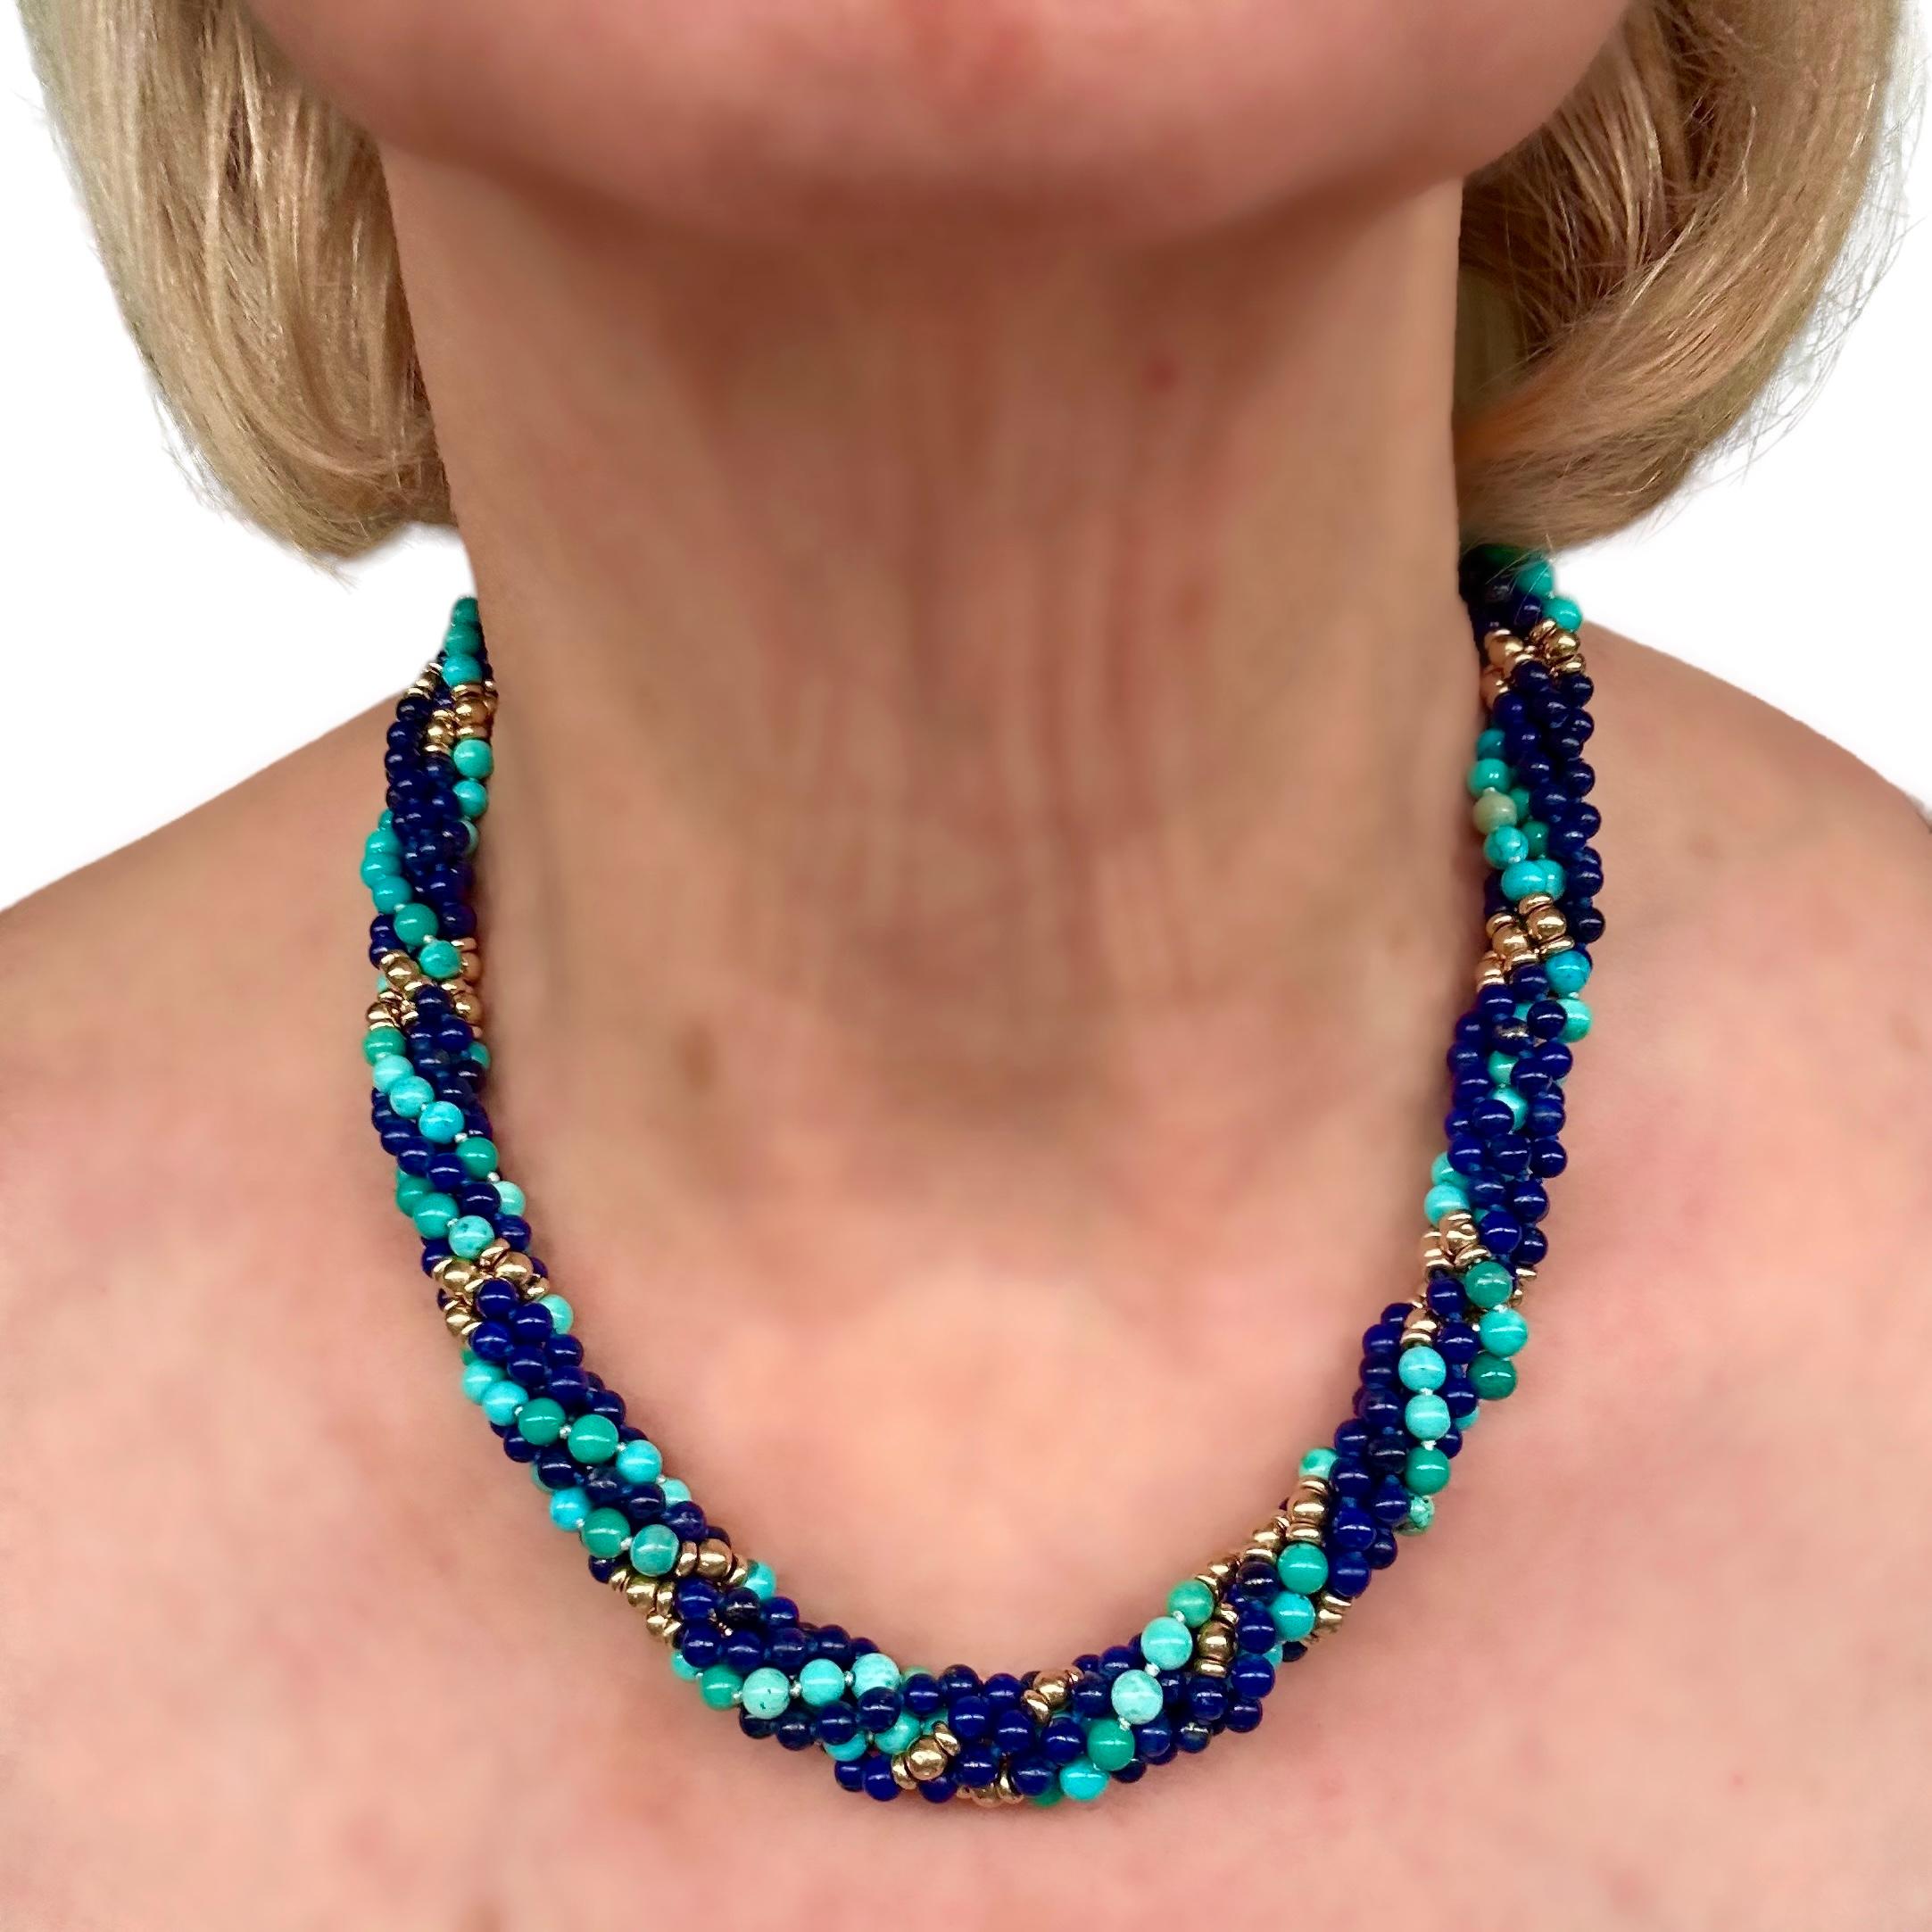 Classic Mid-20th Century Torsade Choker with Lapis, Turquoise and Gold Beads For Sale 3